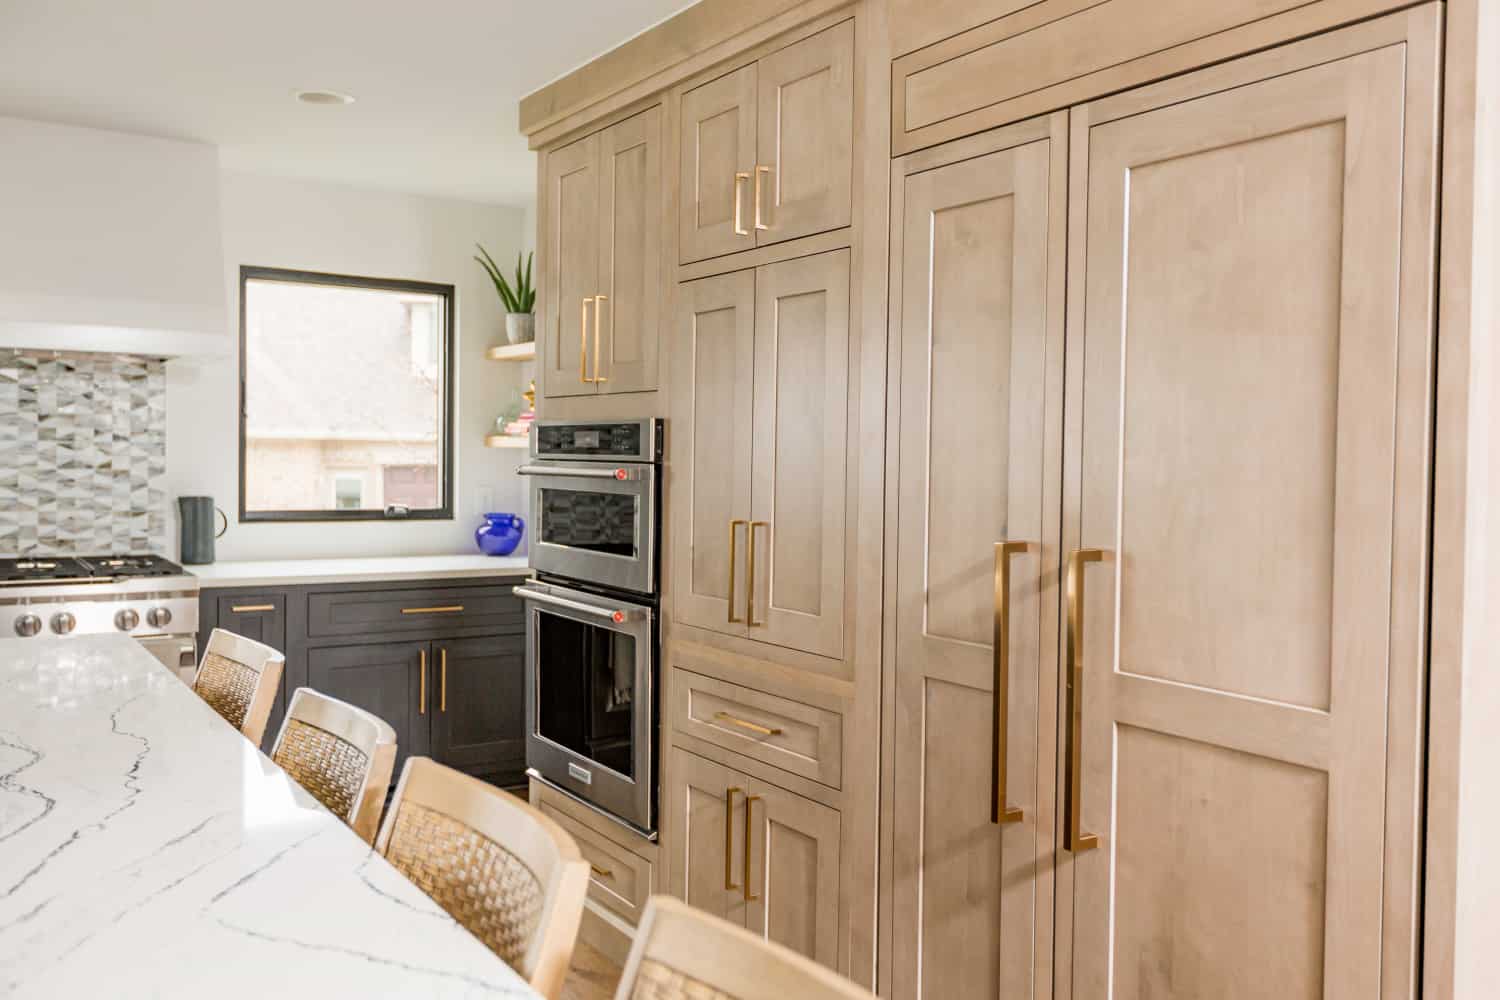 Nicholas Design Build | A remodeled kitchen with wooden cabinets and marble counter tops.